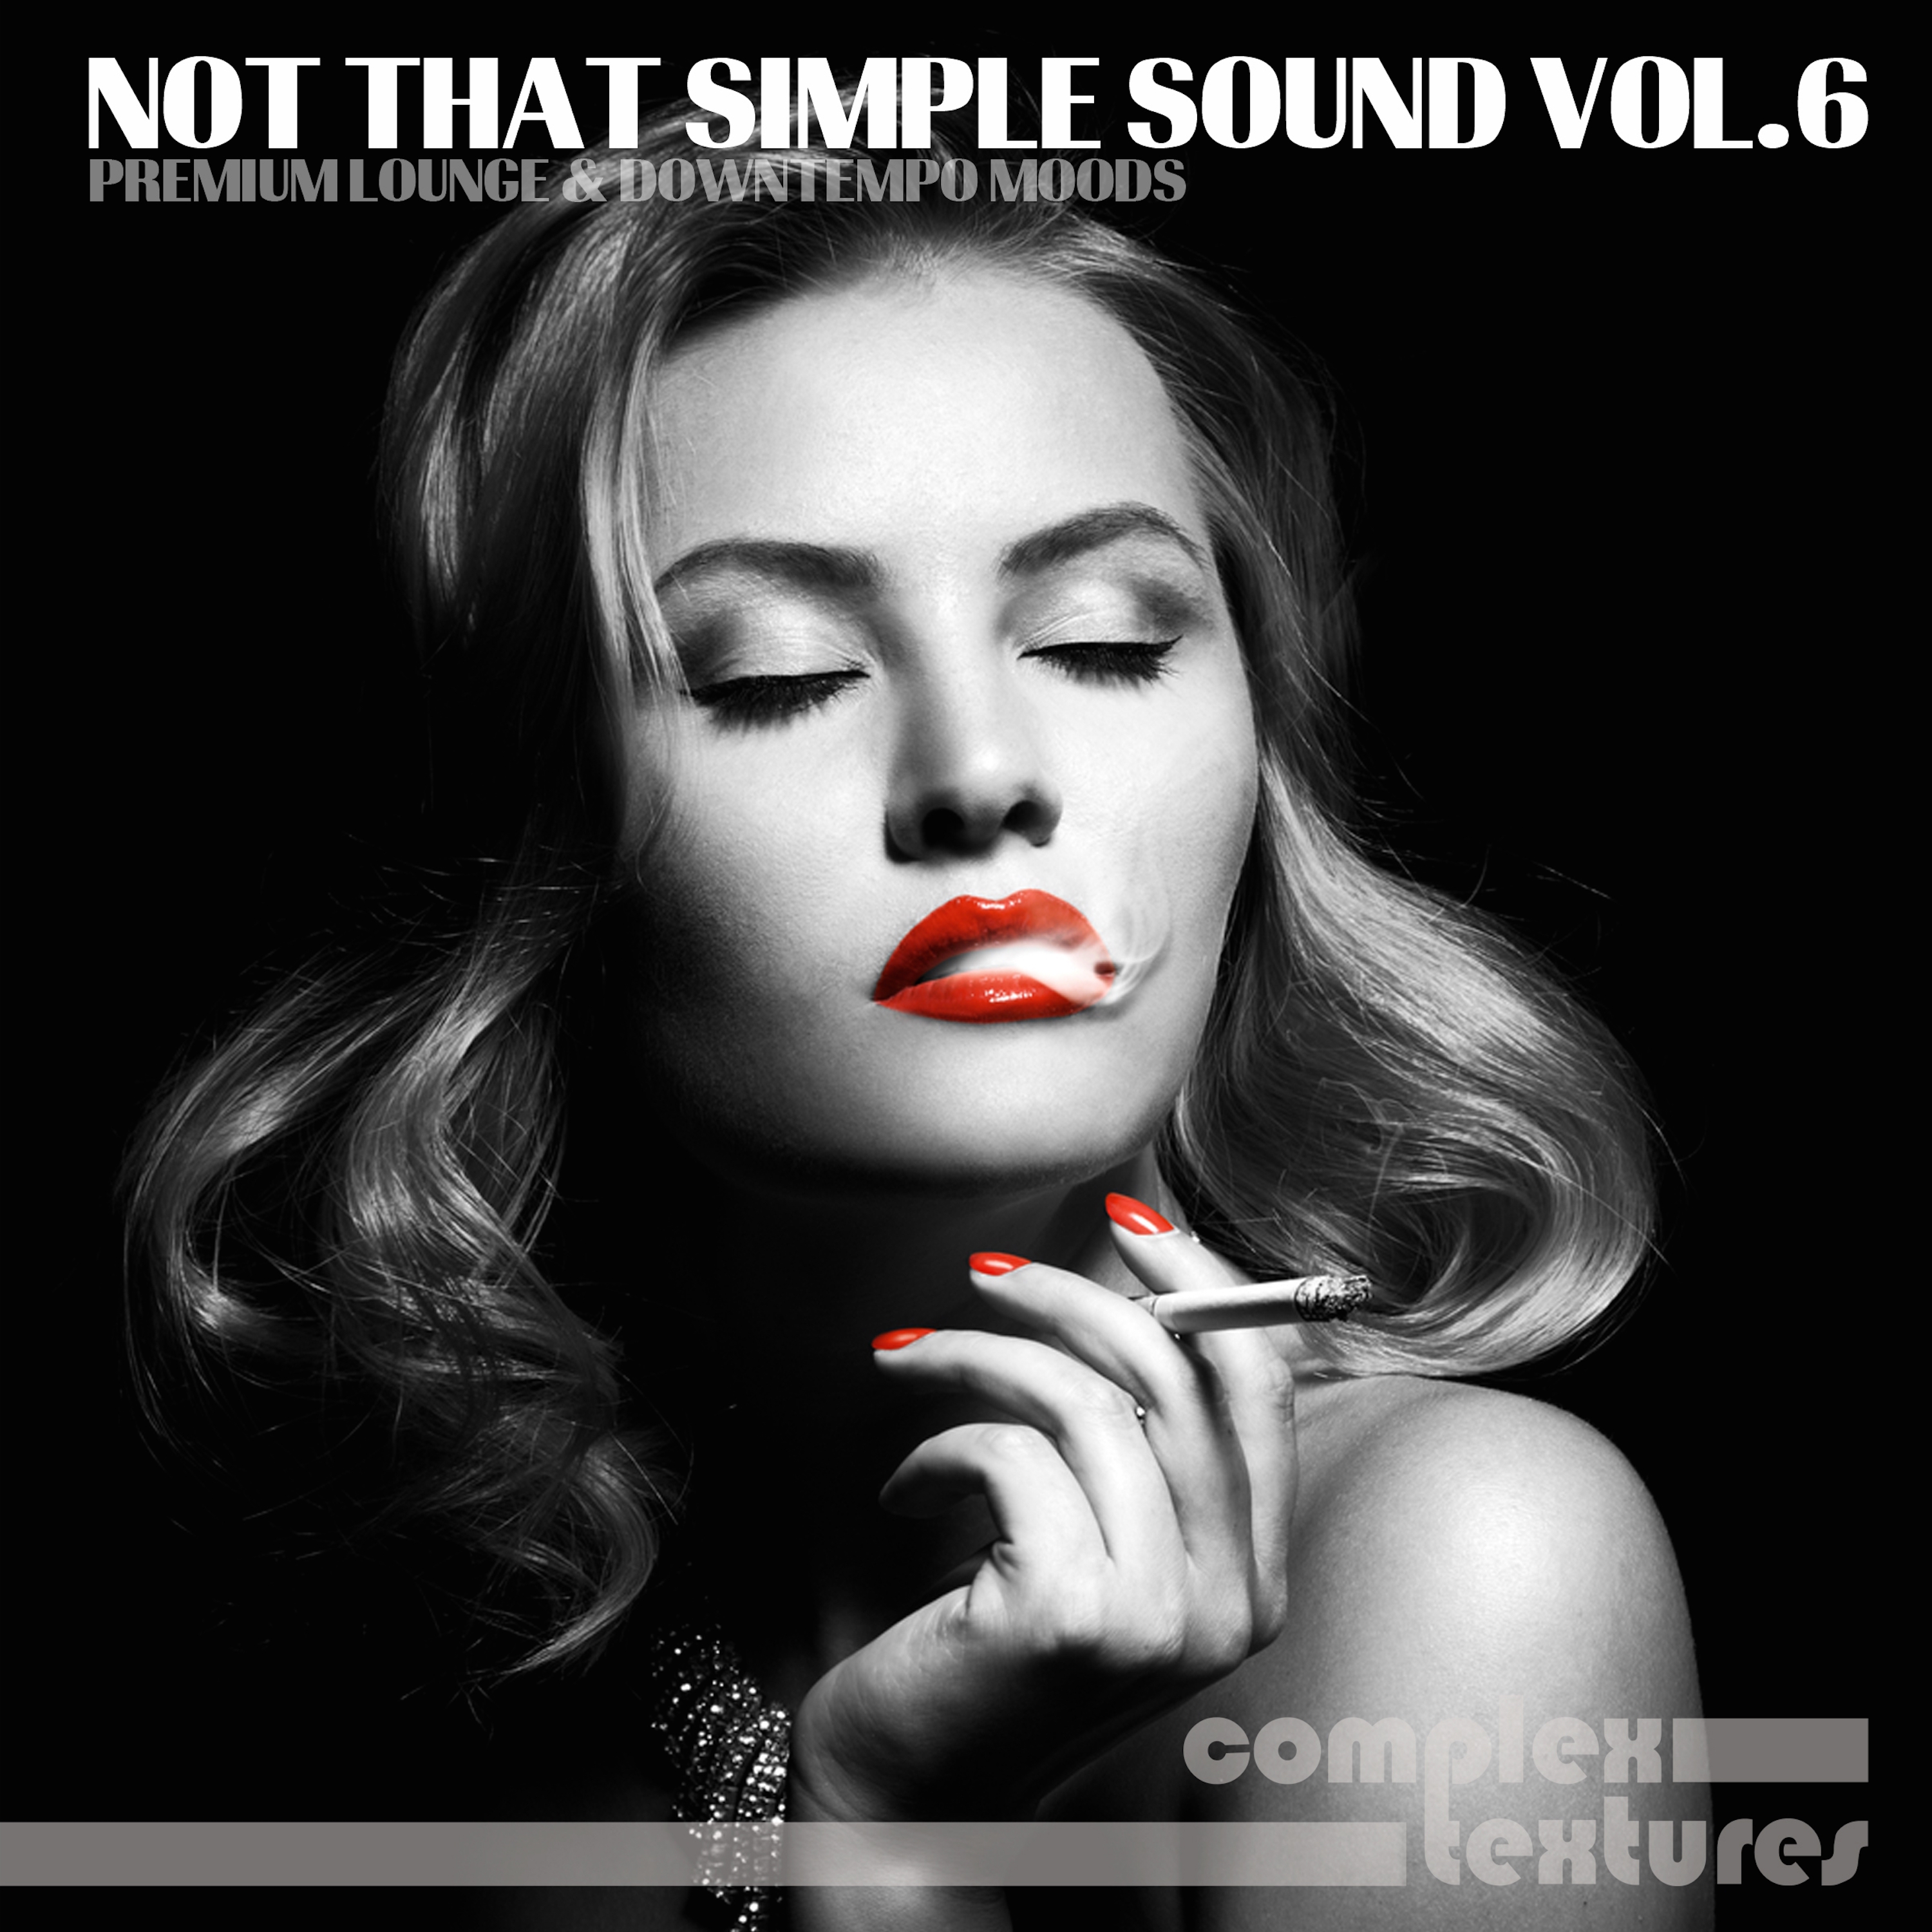 Not That Simple Sound, Vol. 6 (Premium Lounge and Downtempo Moods)